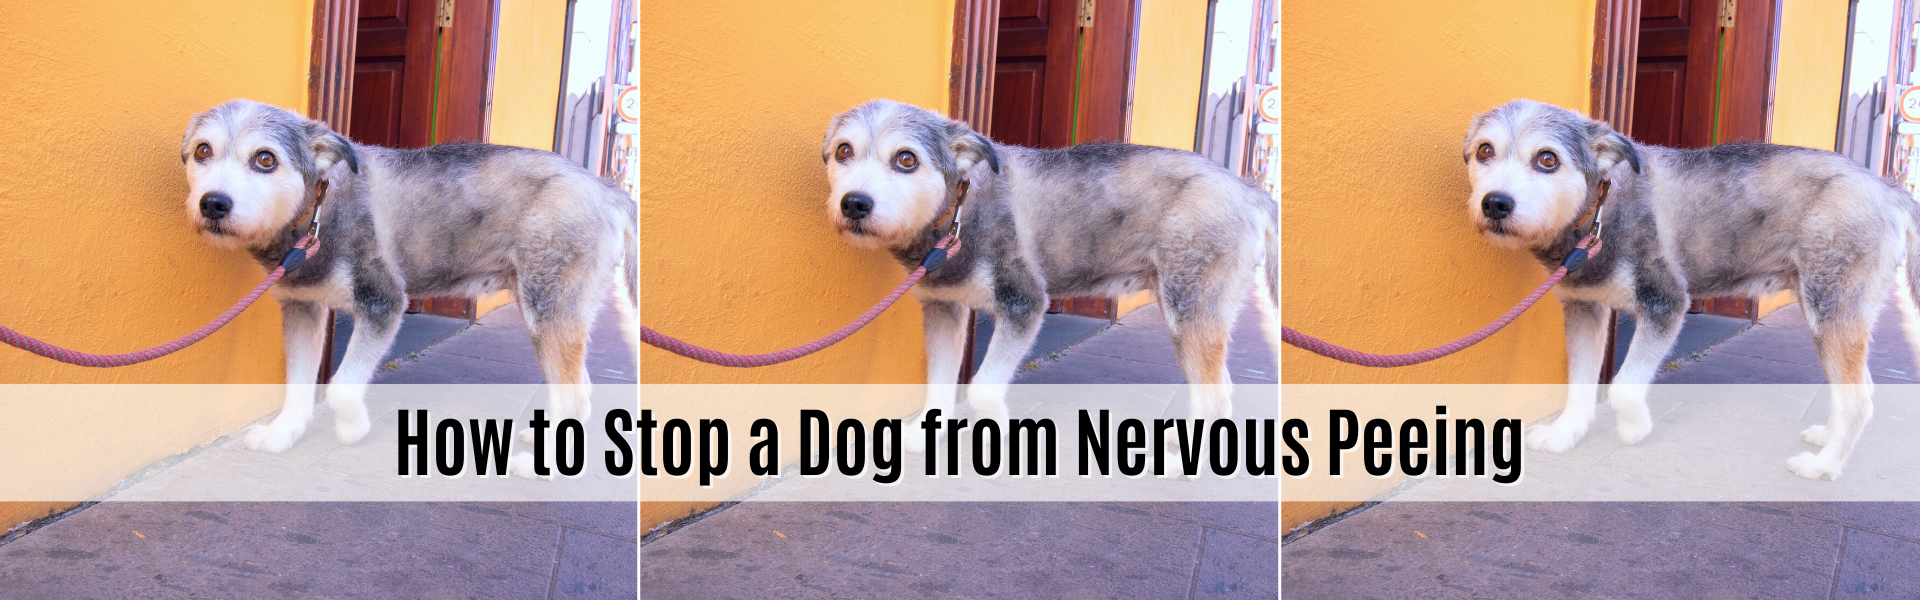 how to stop a dog from nervous peeing